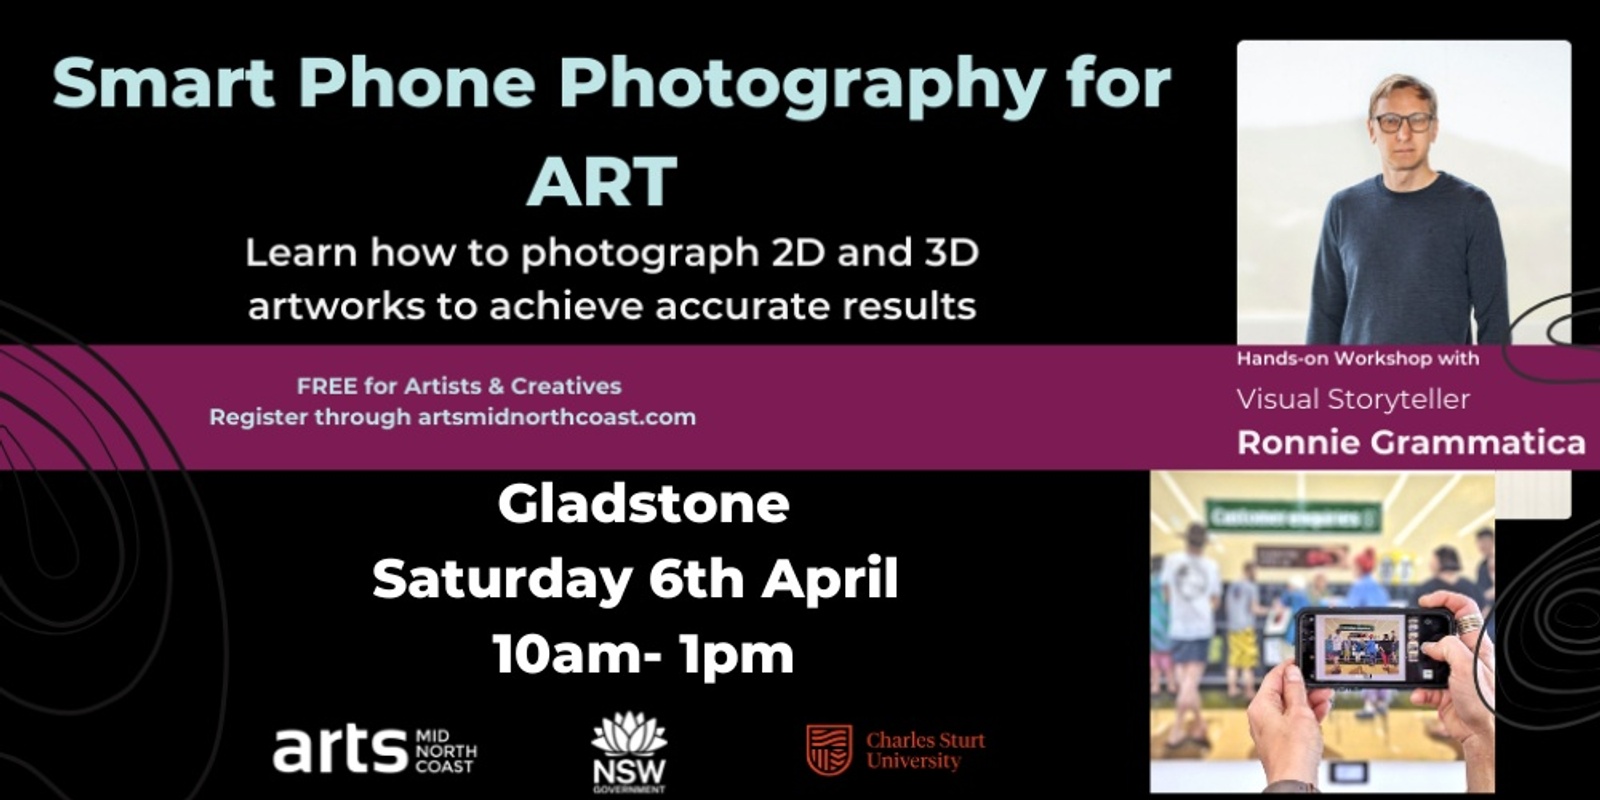 Banner image for Smart Phone Photography for ART- Gladstone